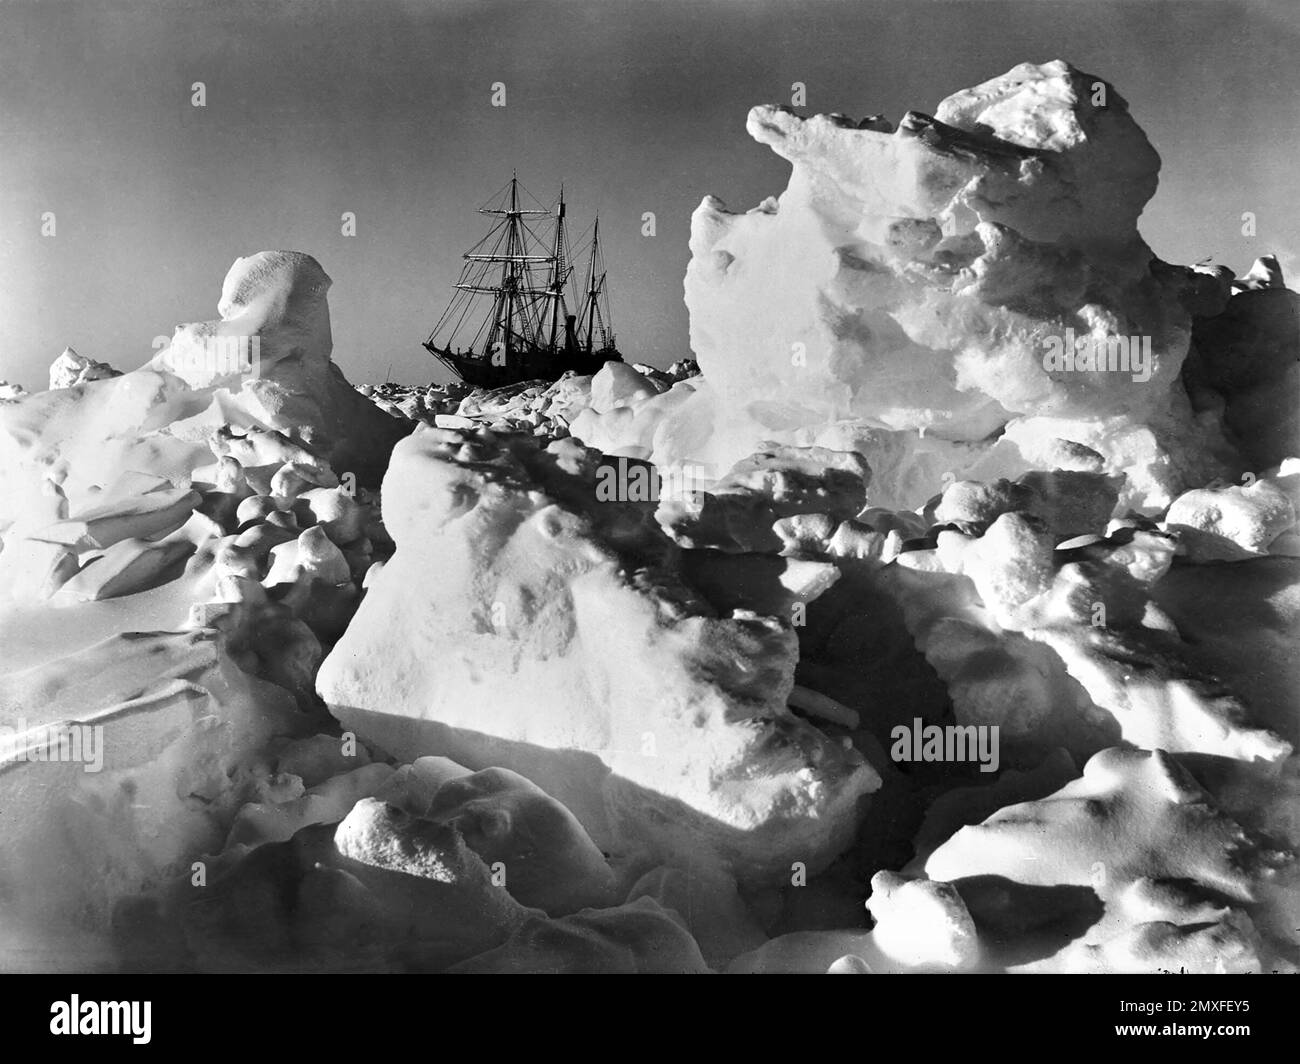 Ernest Shackleton, Endurance. Sir Ernest Shackleton's ship, Endurance, trapped in the ice during the 1914/15 Imperial Trans-Antarctic Expedition. Photo by Frank Hurley, 1915 Stock Photo